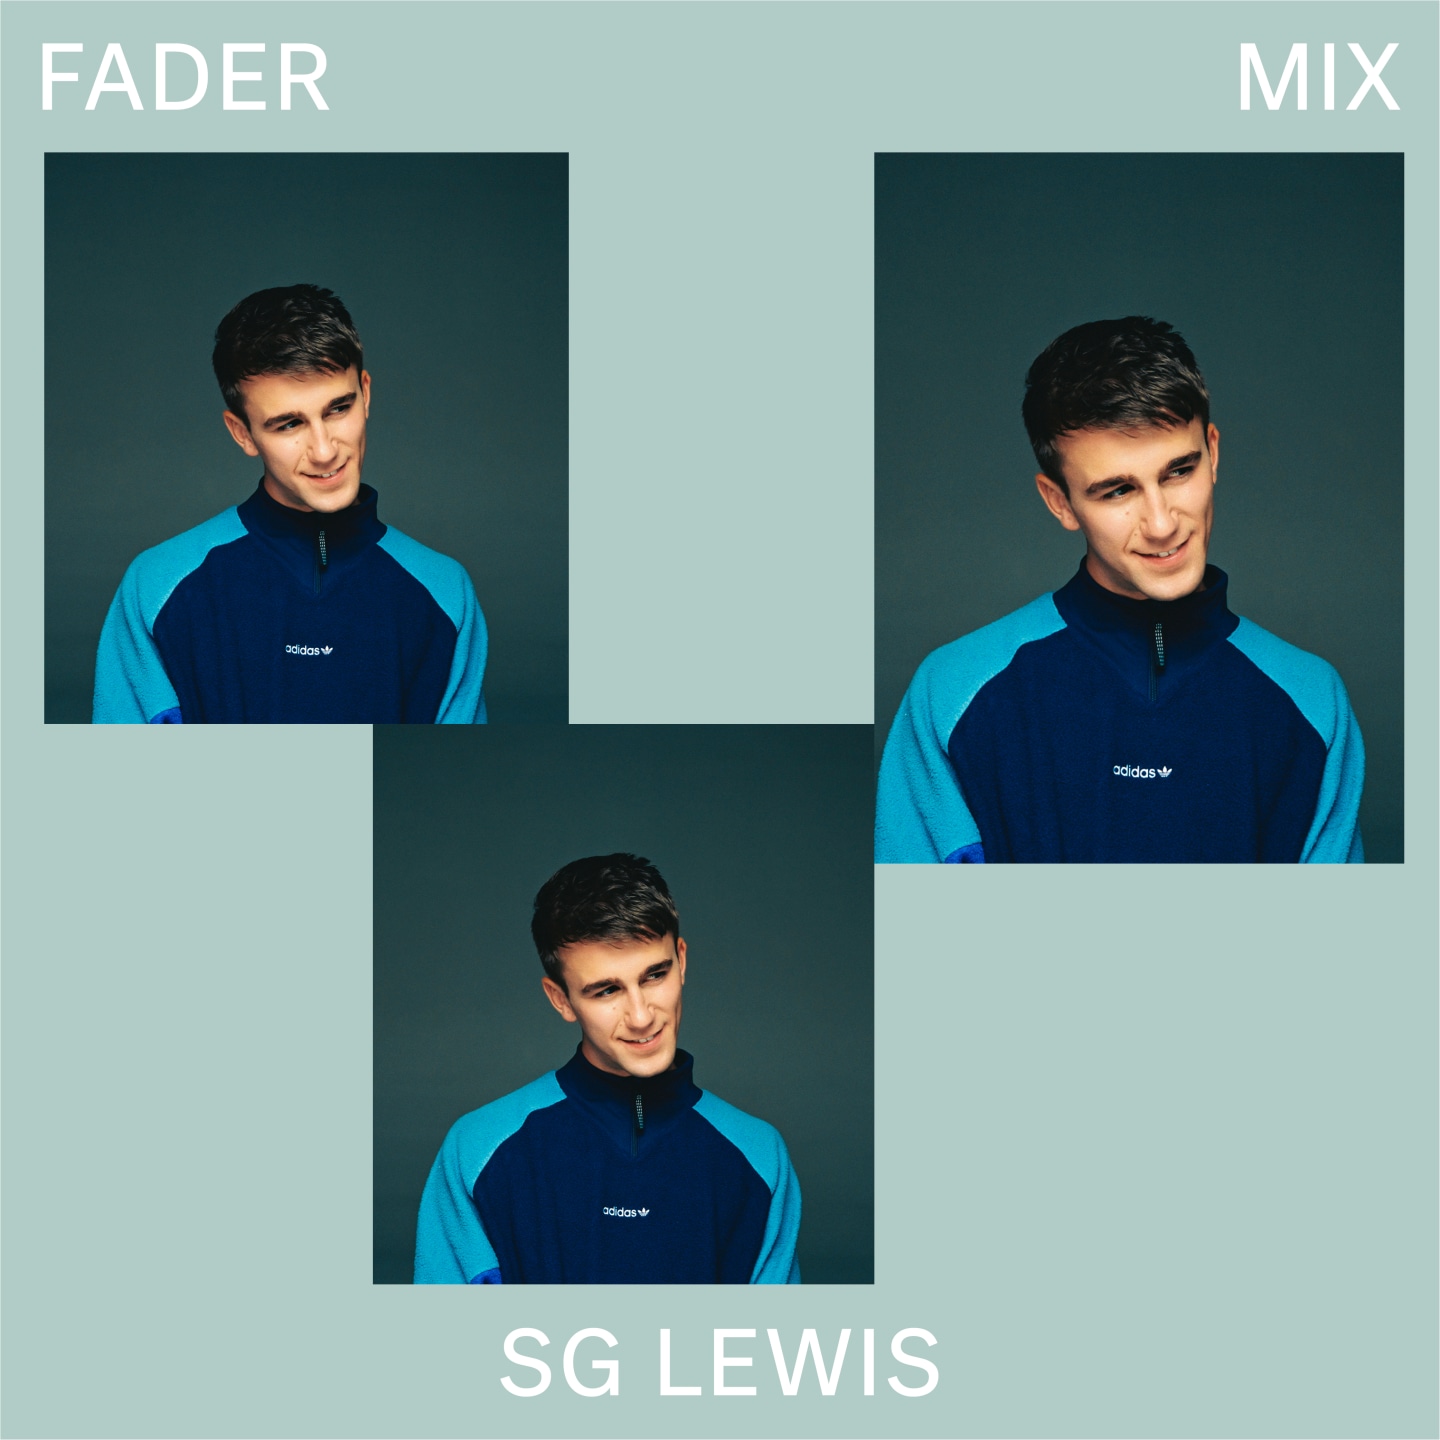 Listen to a new FADER Mix by SG Lewis